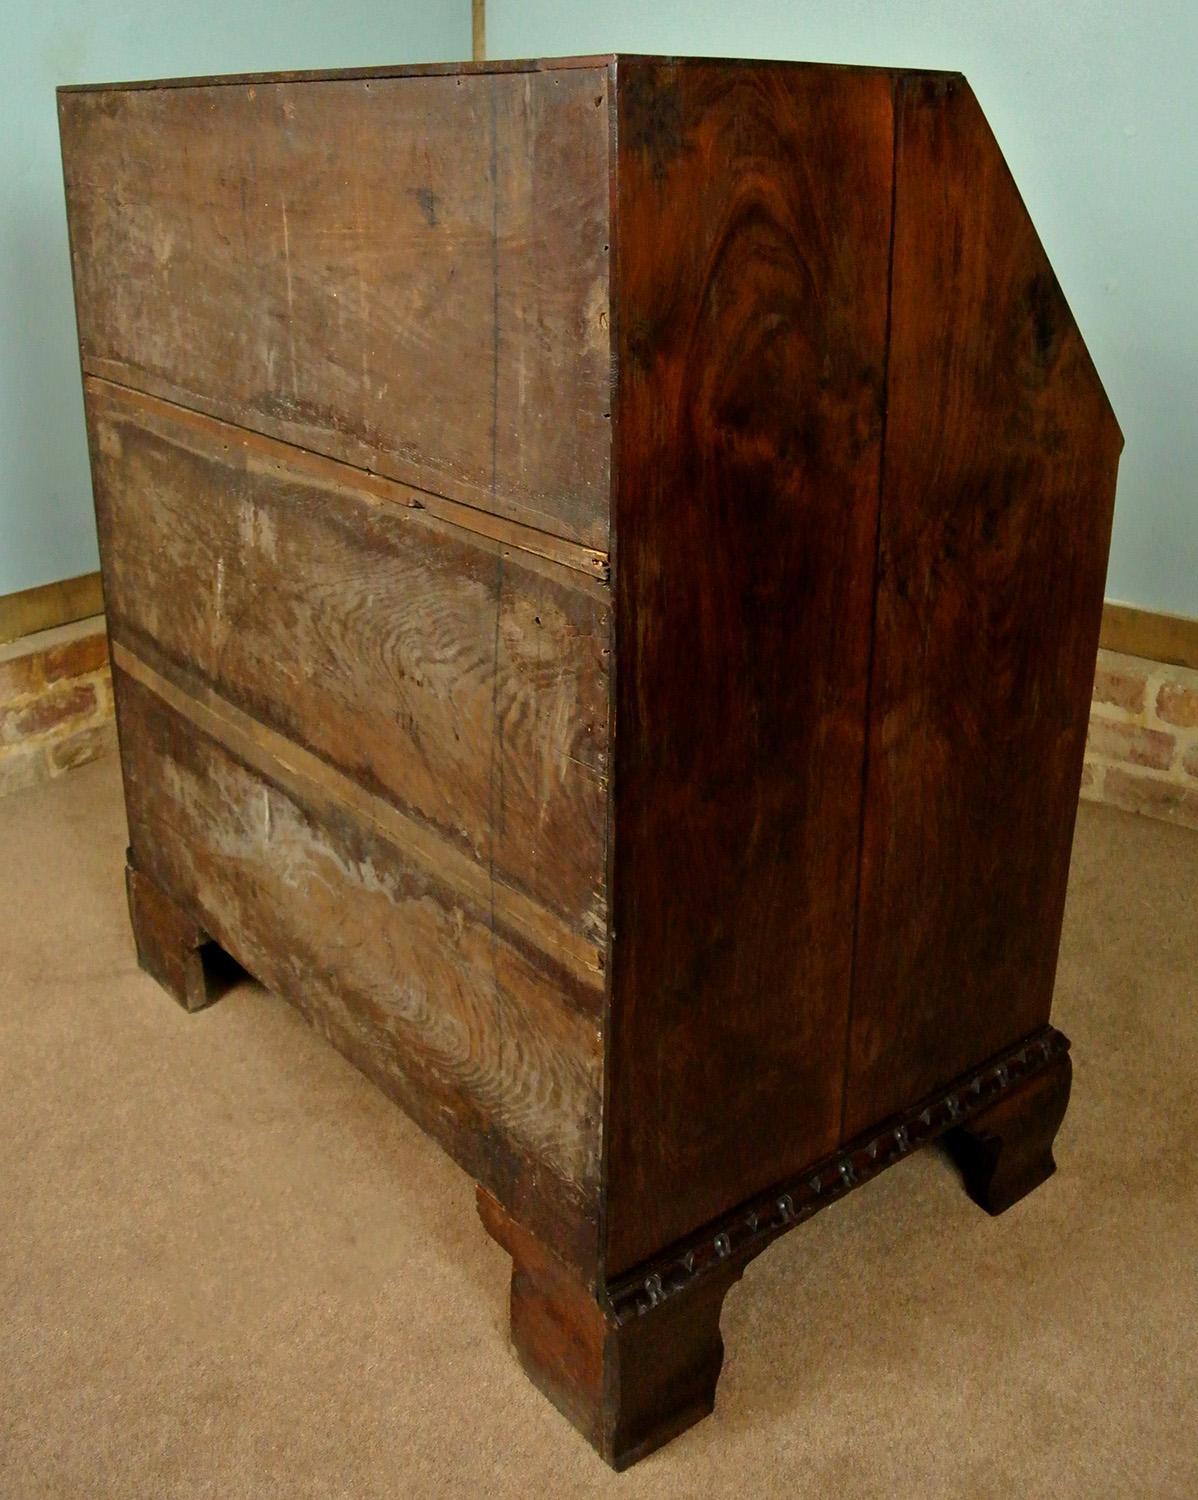 Exceptional Rare and Fine Padouk Wood Bureau in the Chippendale Manner, c. 1780 For Sale 6